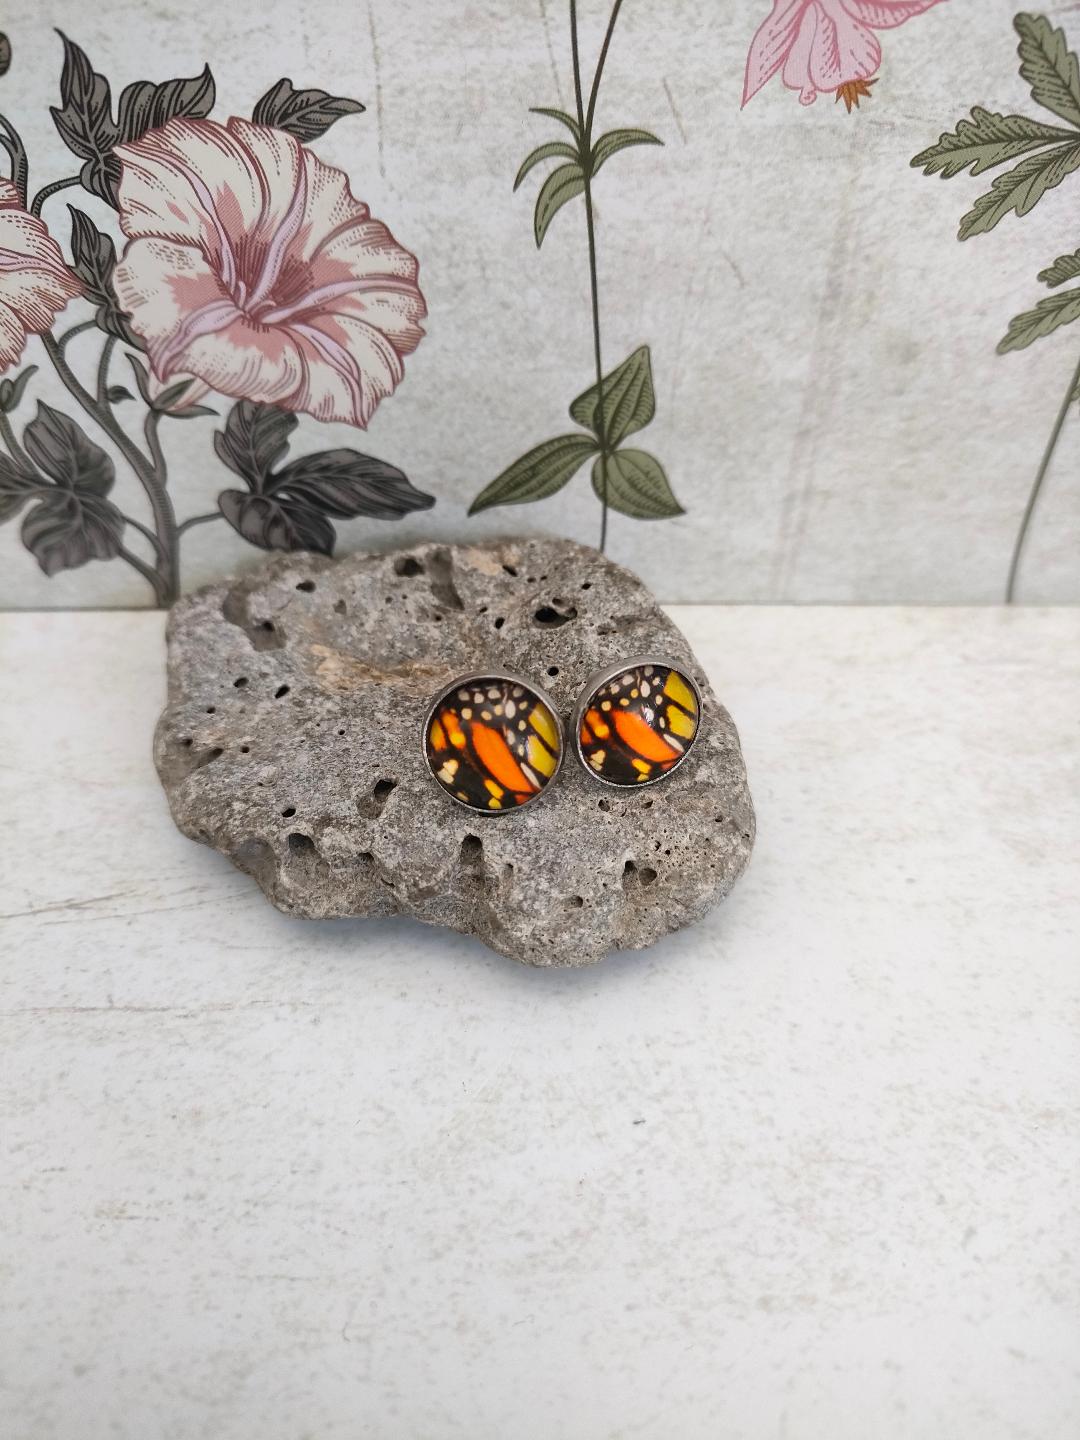 12mm Butterfly Wing Print Studs, Insect Earrings for Her, Orange and Black Butterfly Earrings, Gift for Mum, Hypoallergenic Studs.